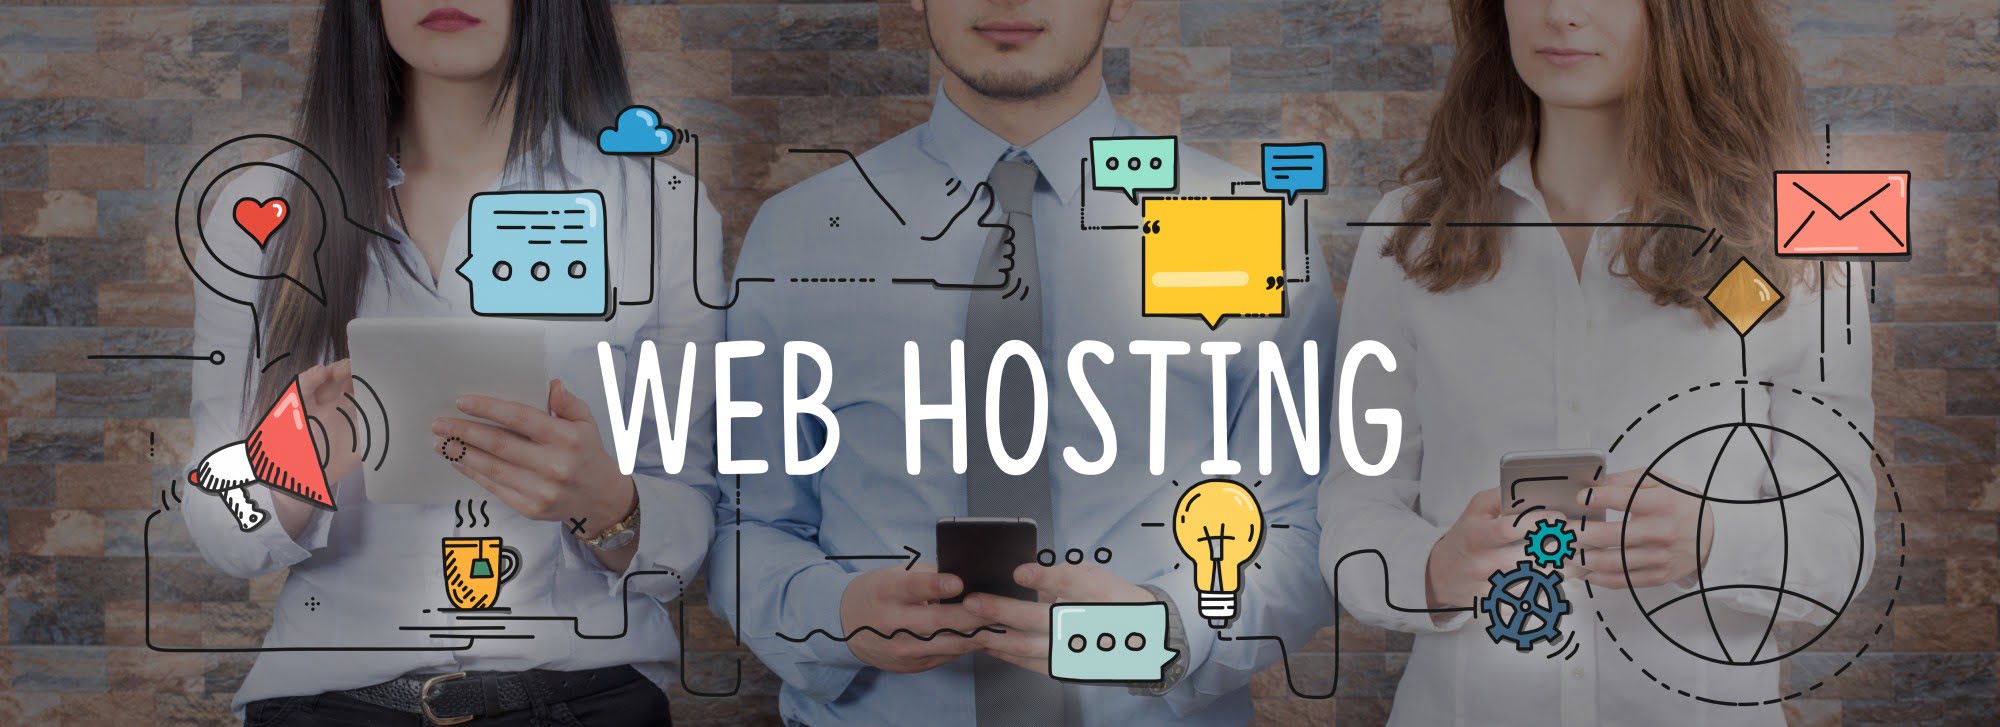 Five Questions to Ask a Potential Hosting Provider